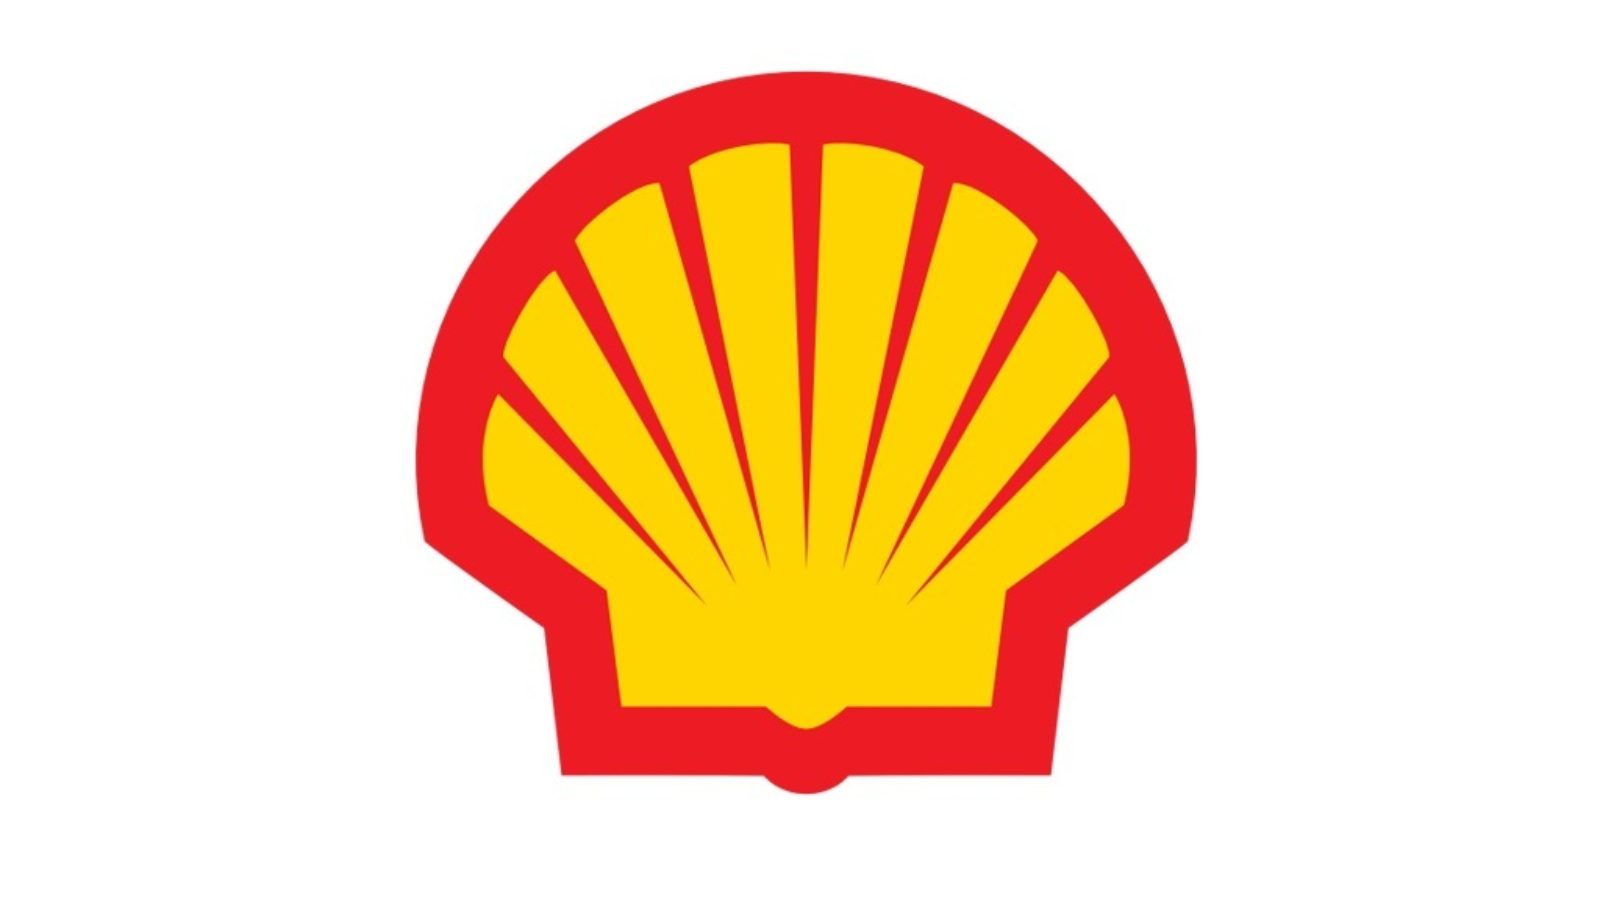 Royal Dutch Shell plc second quarter 2021 Euro and GBP equivalent dividend payments